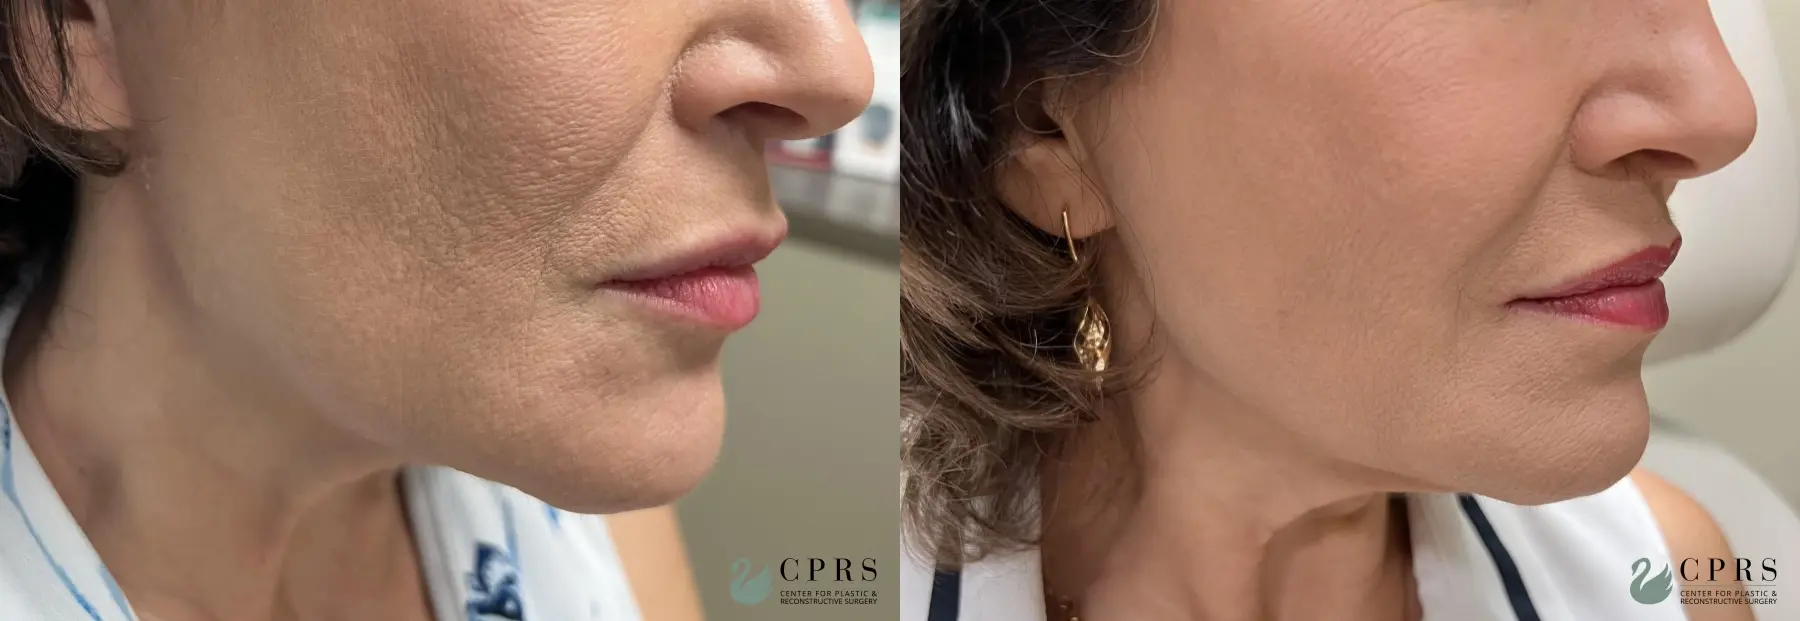 Fillers: Patient 2 - Before and After  